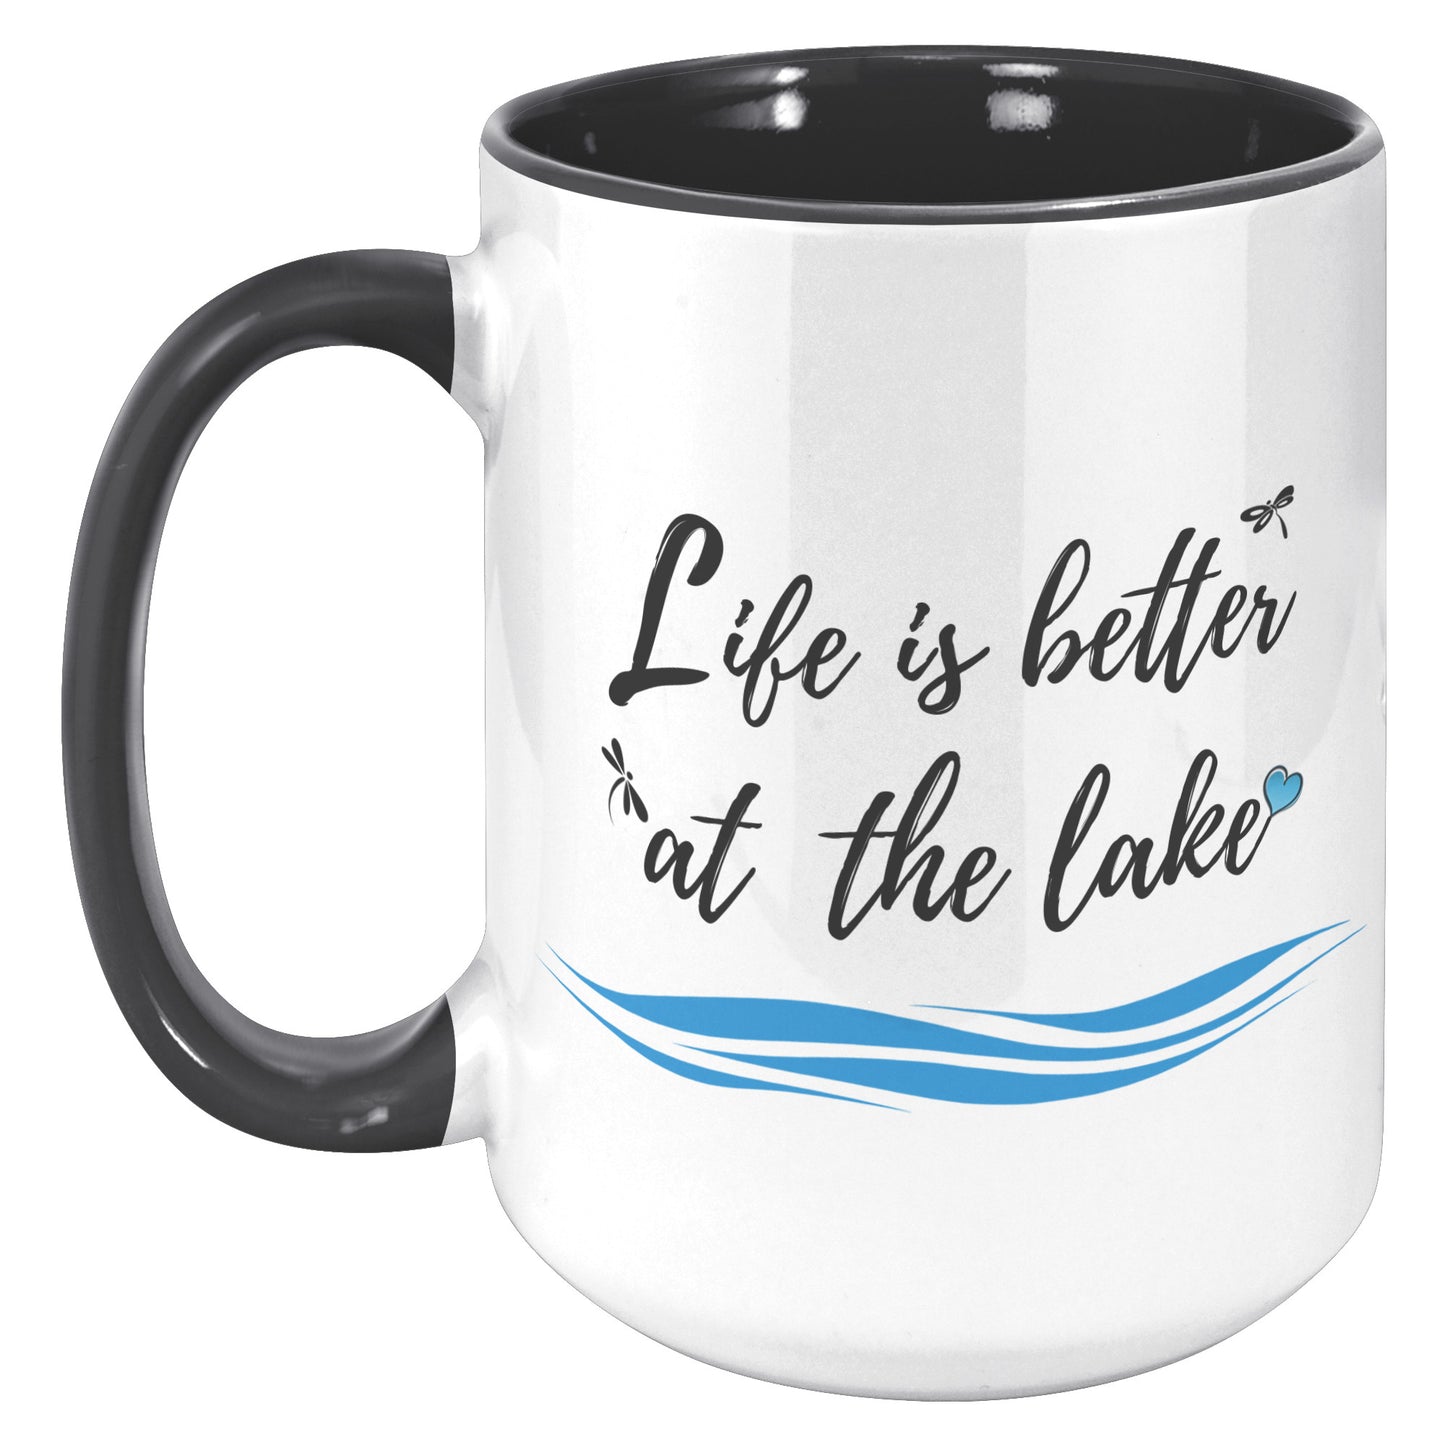 Life is better at the lake - Color Accent Mug (15oz)